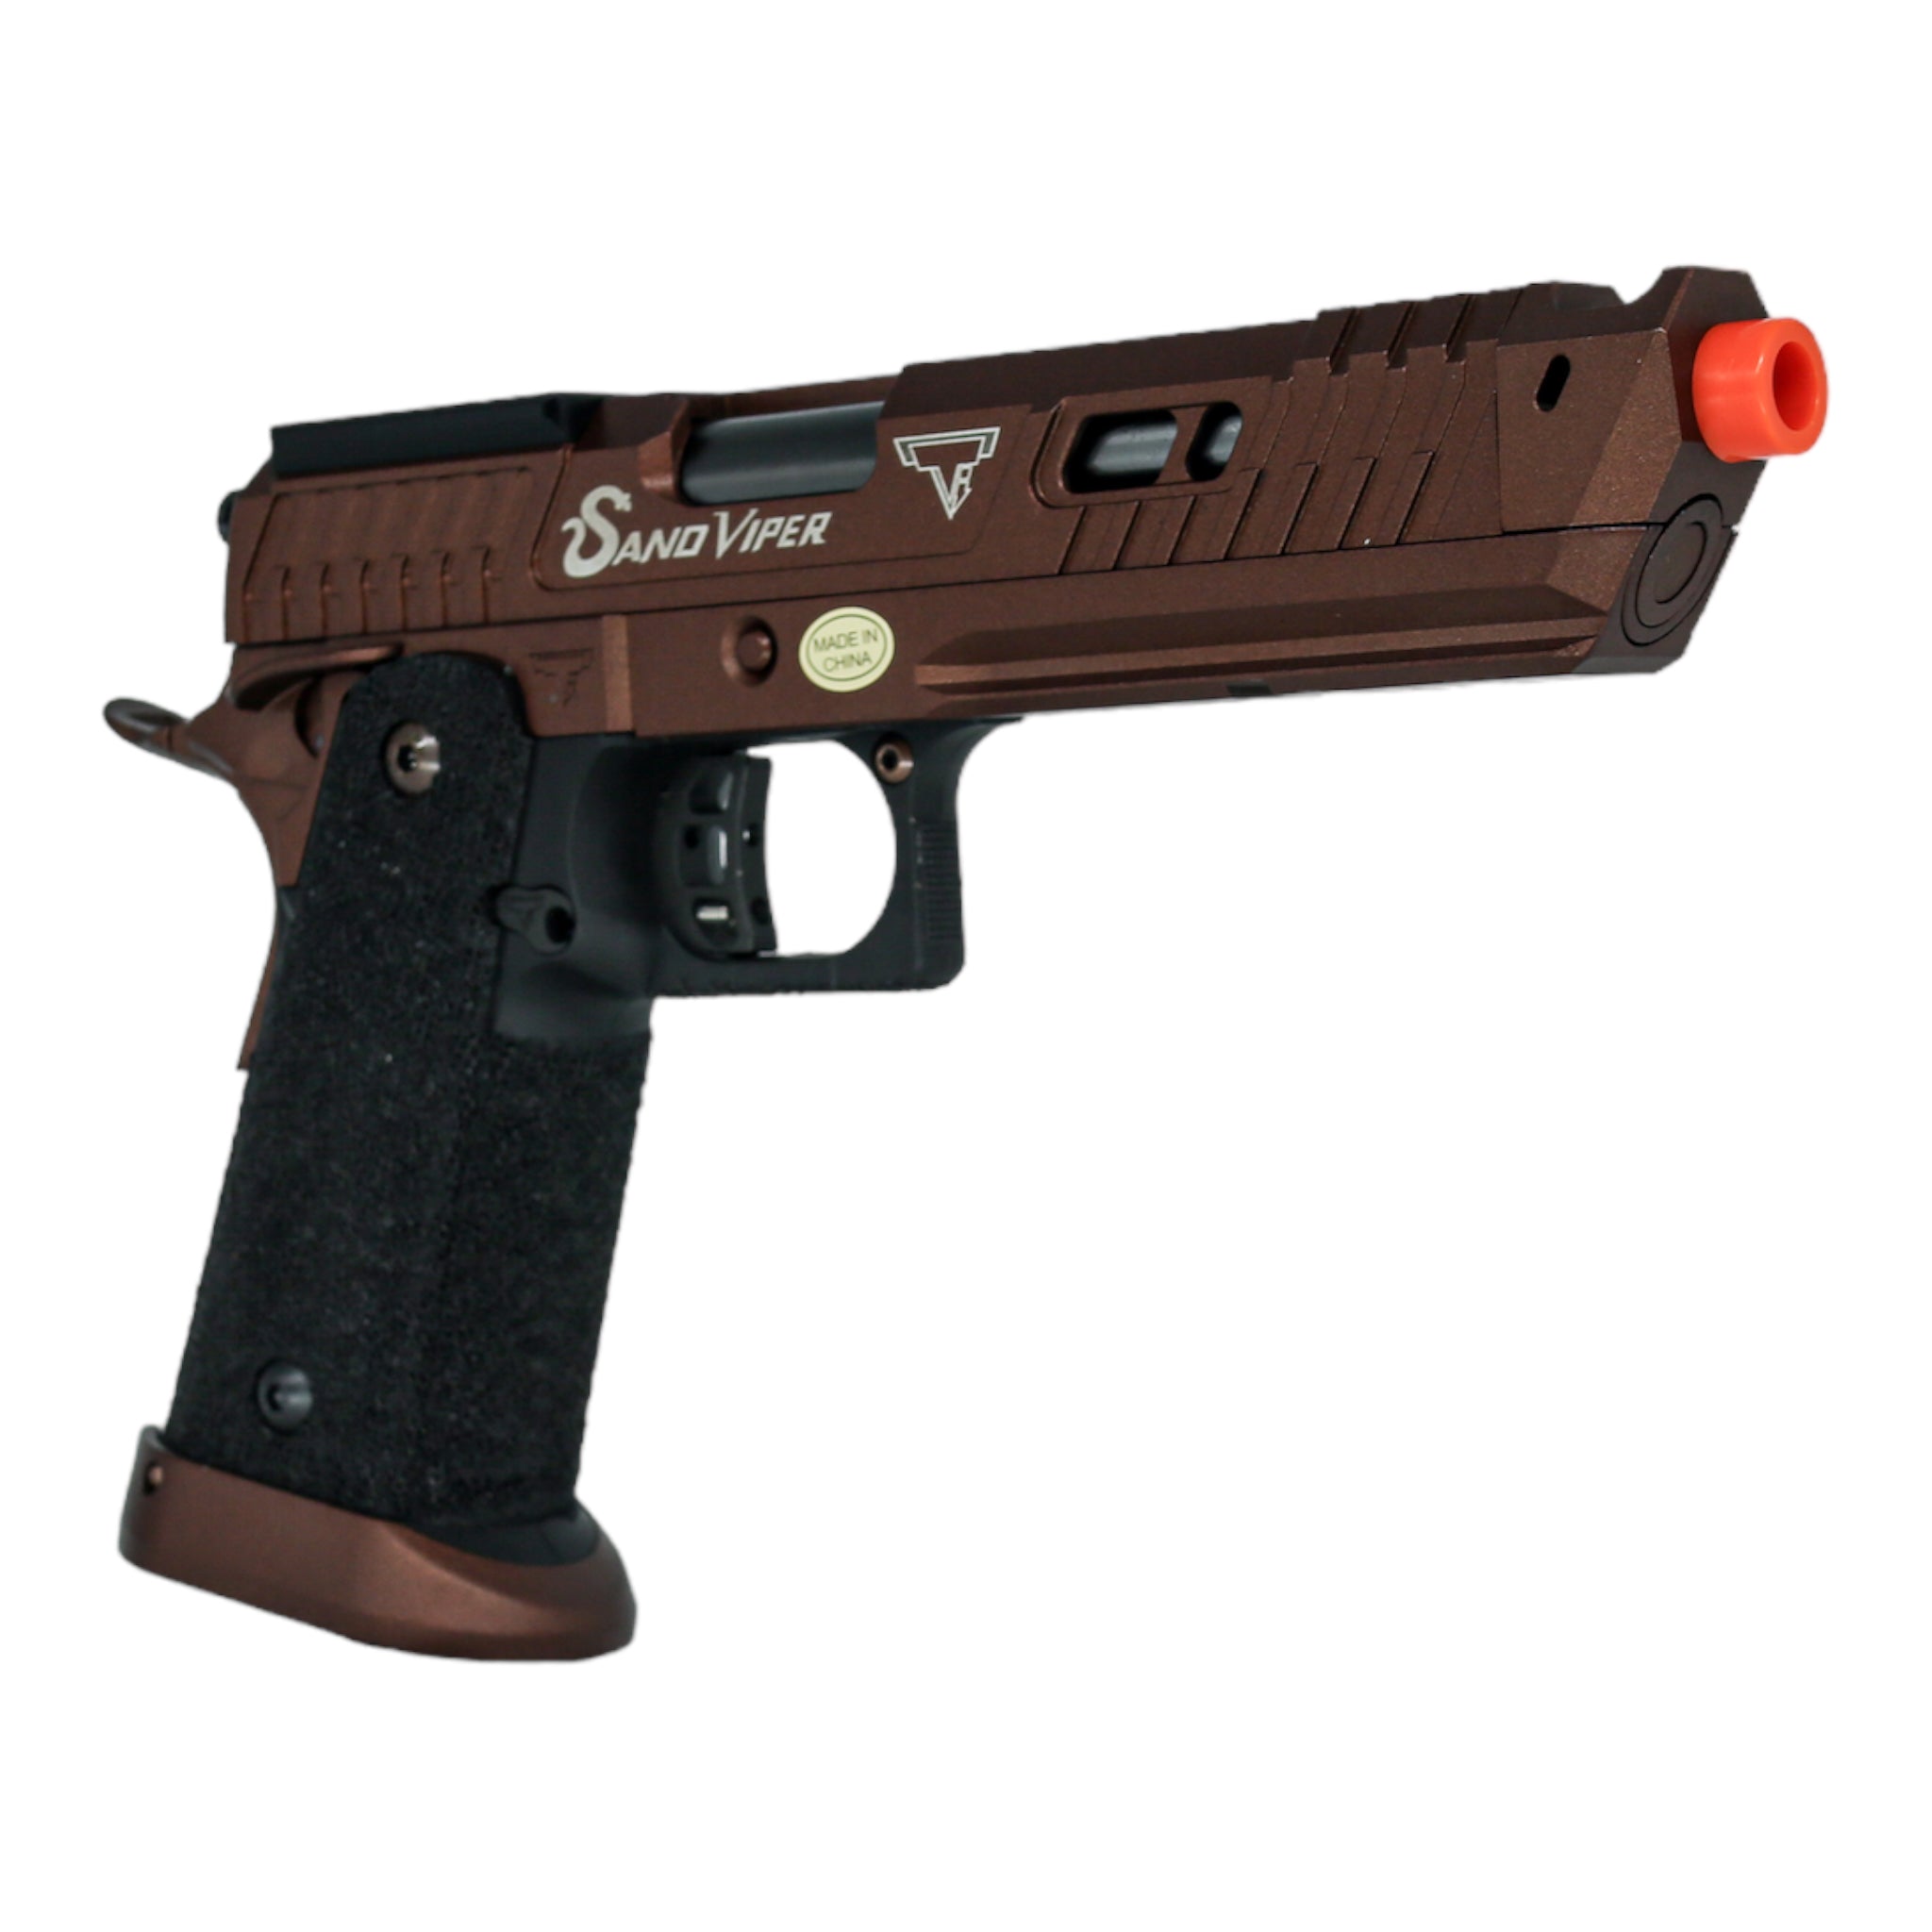 TTI Sand Viper Hi-Capa by JAG Arms Airsoft Pistol - ssairsoft.com